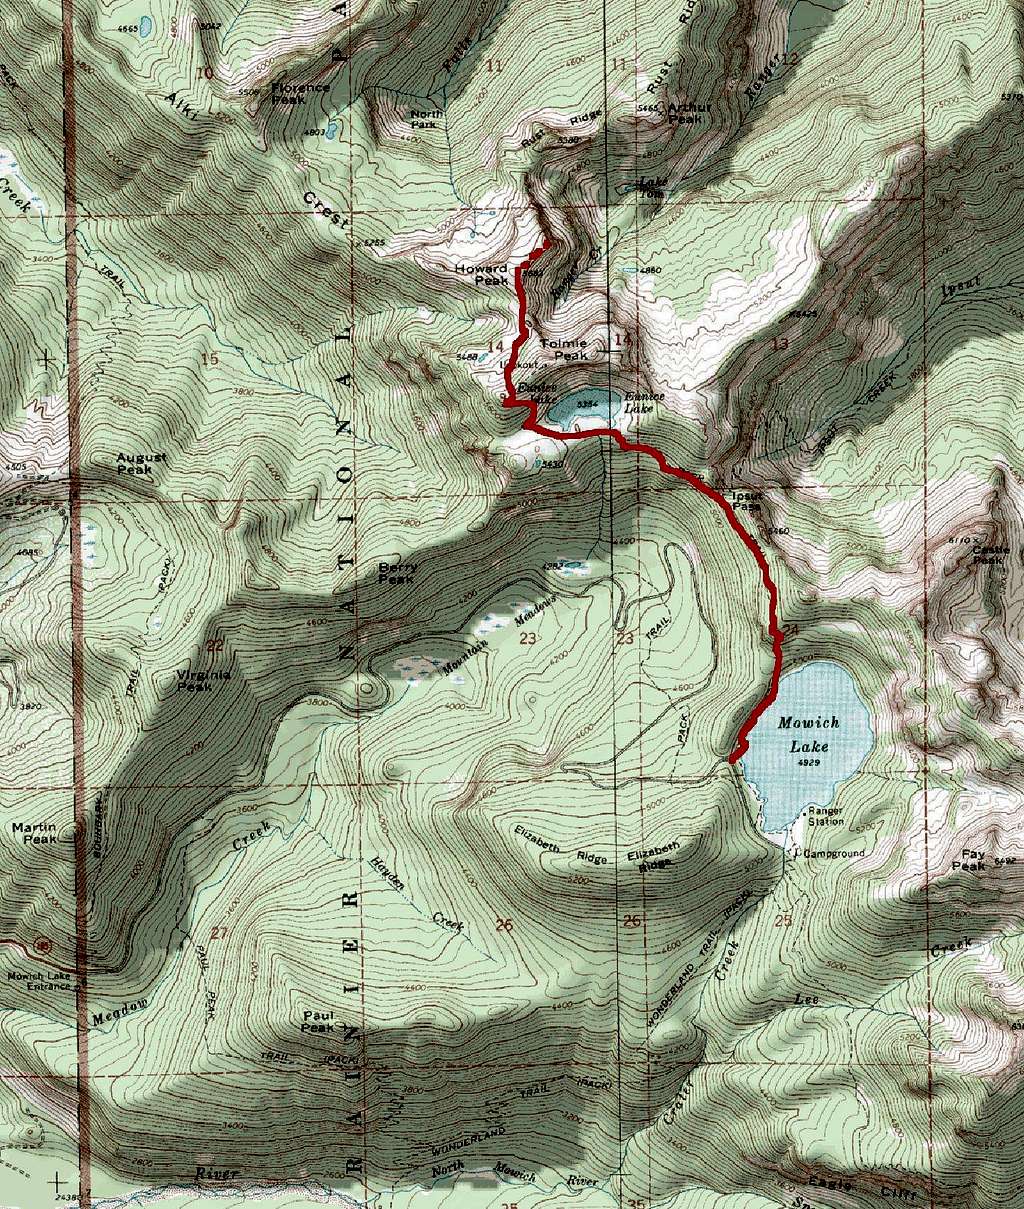 Summer Route From Mowich Lake 